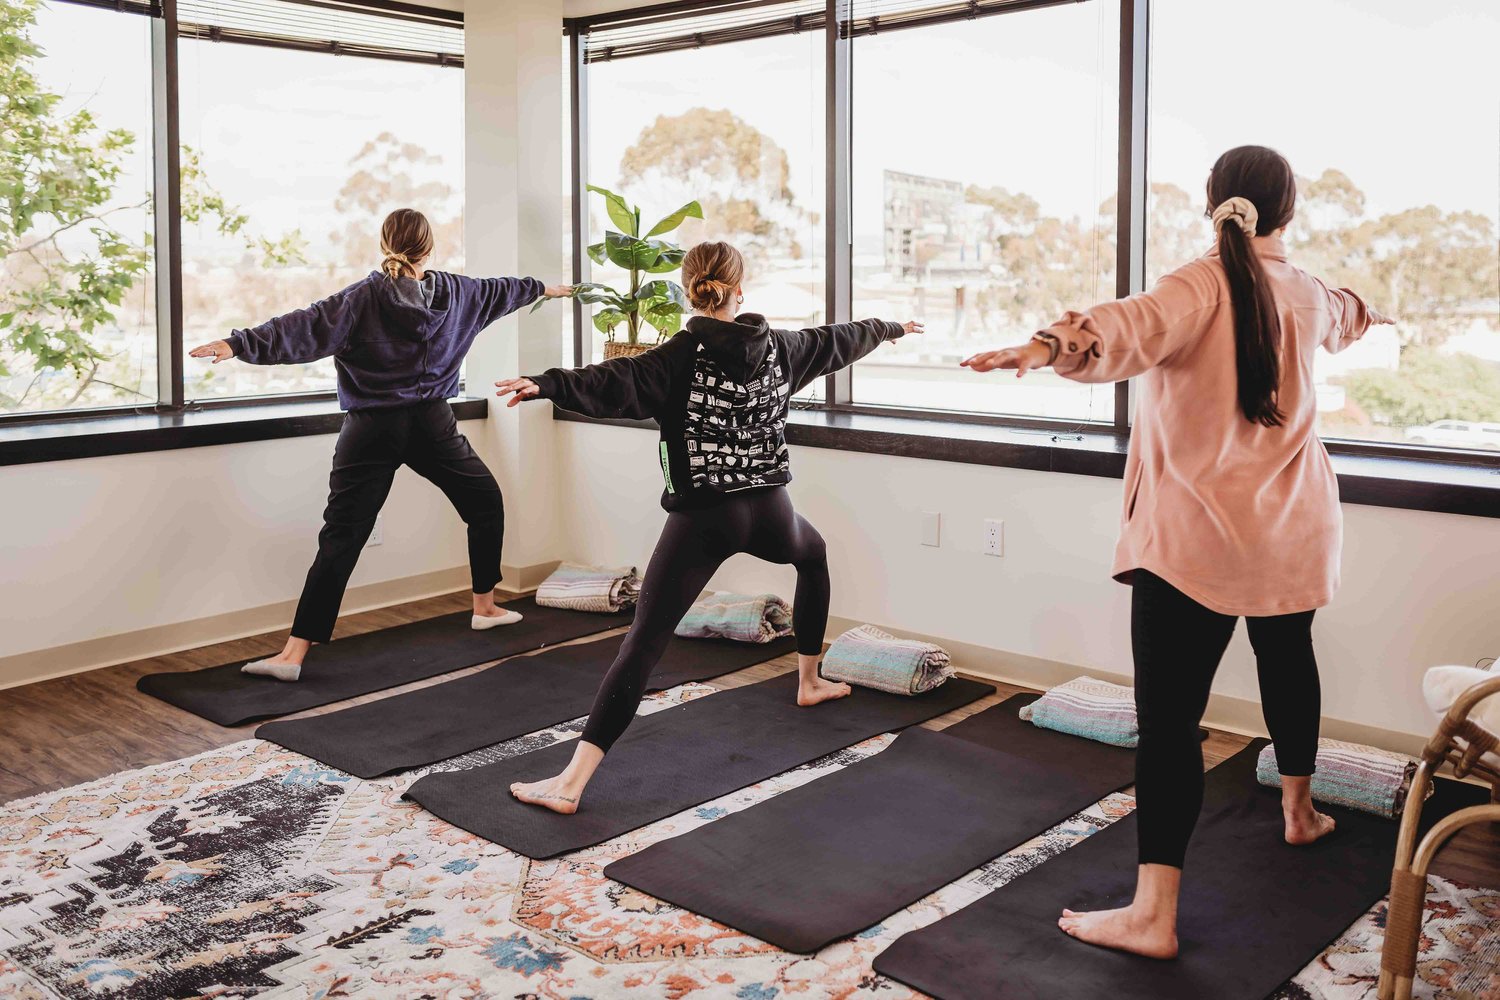 Yoga: three women practicing yoga on black yoga mats in front of a large window